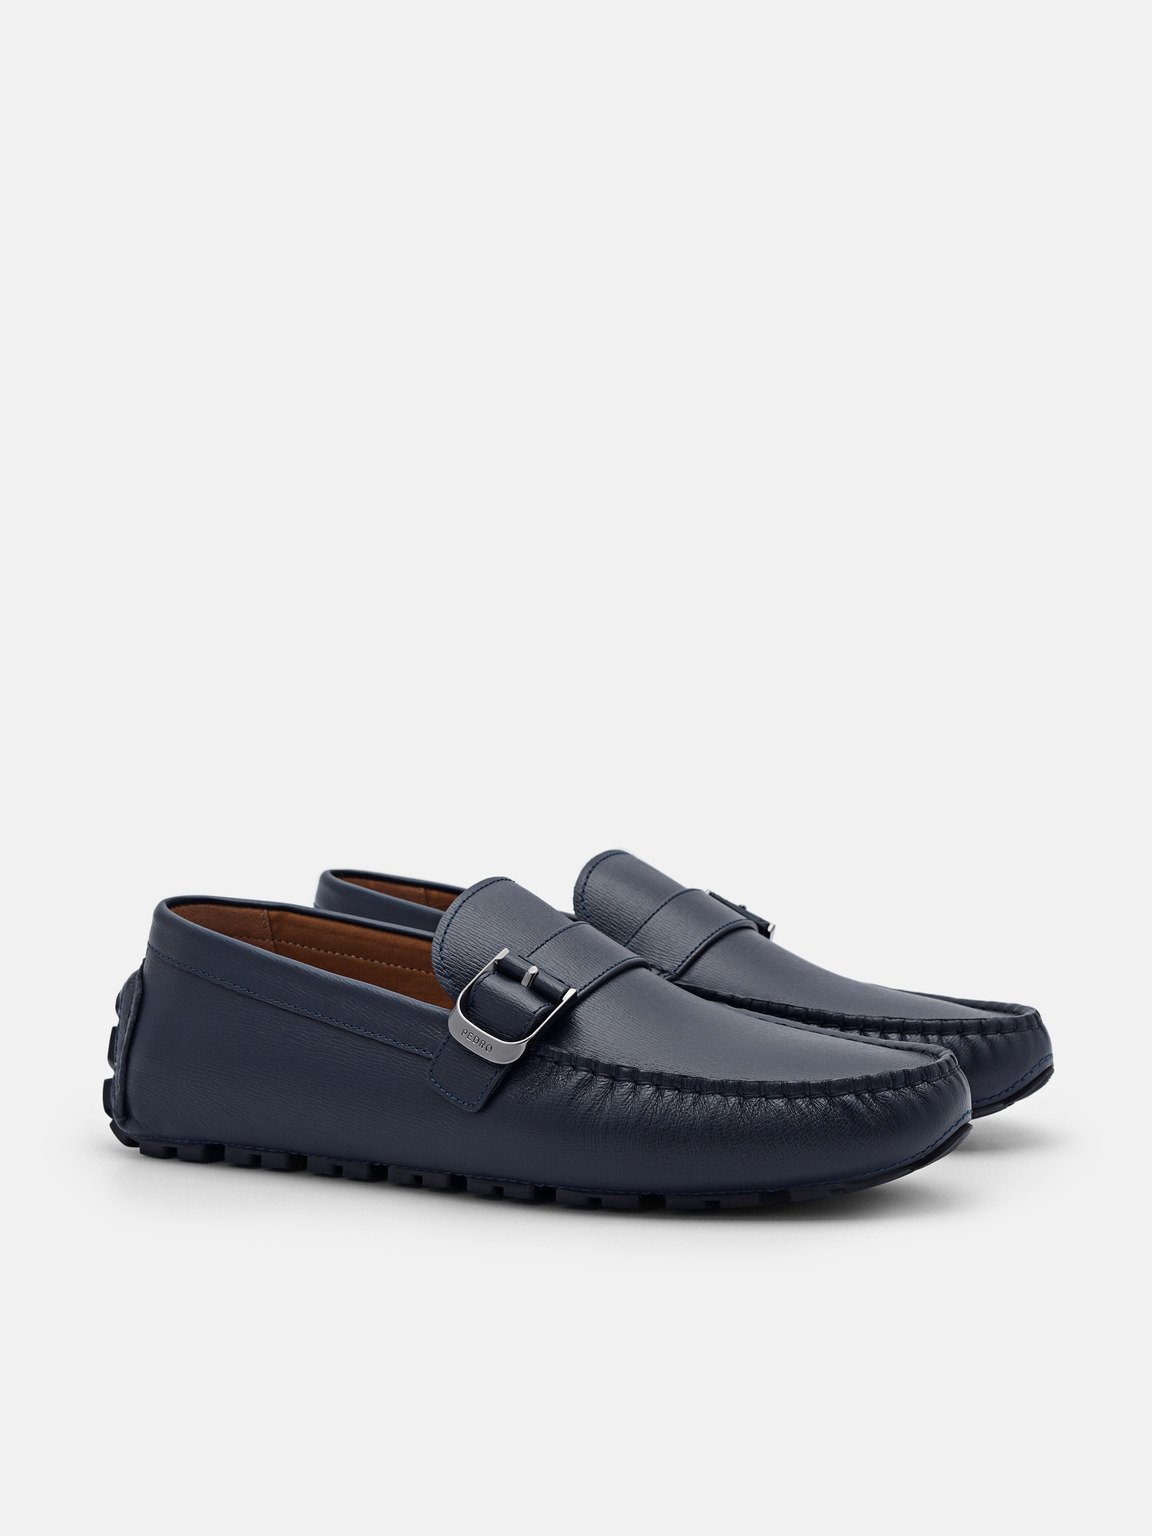 Helix Leather Driving Shoes, Navy